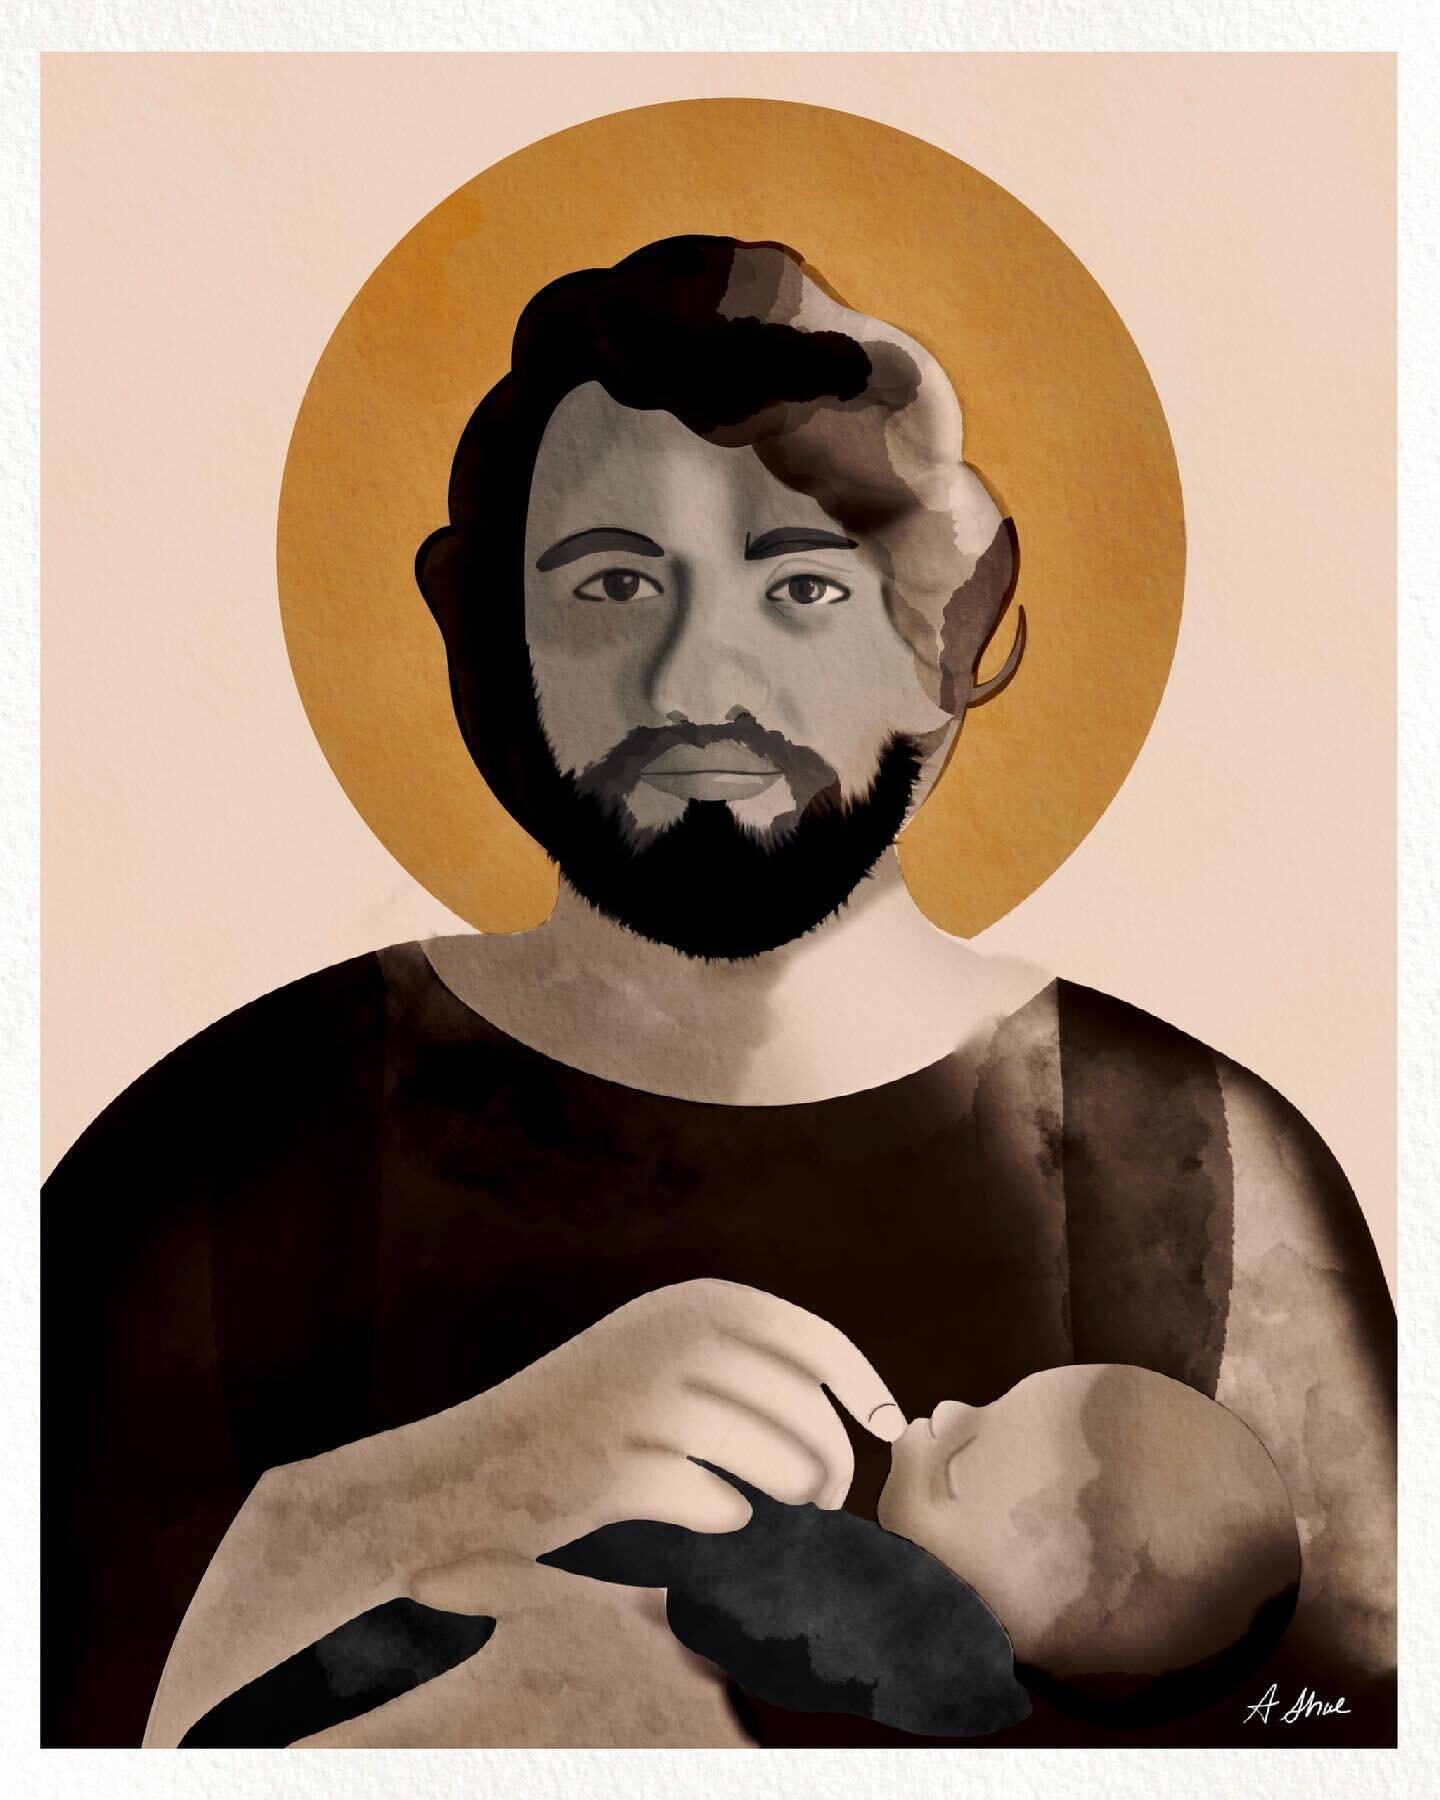 Just finished up this #digitalwatercolor commission of St. Joseph. Instead of holding Jesus, I chose to have him holding a representation of humanity. 

The biggest challenge was creating a composite of middle eastern men who weren&rsquo;t outrageous